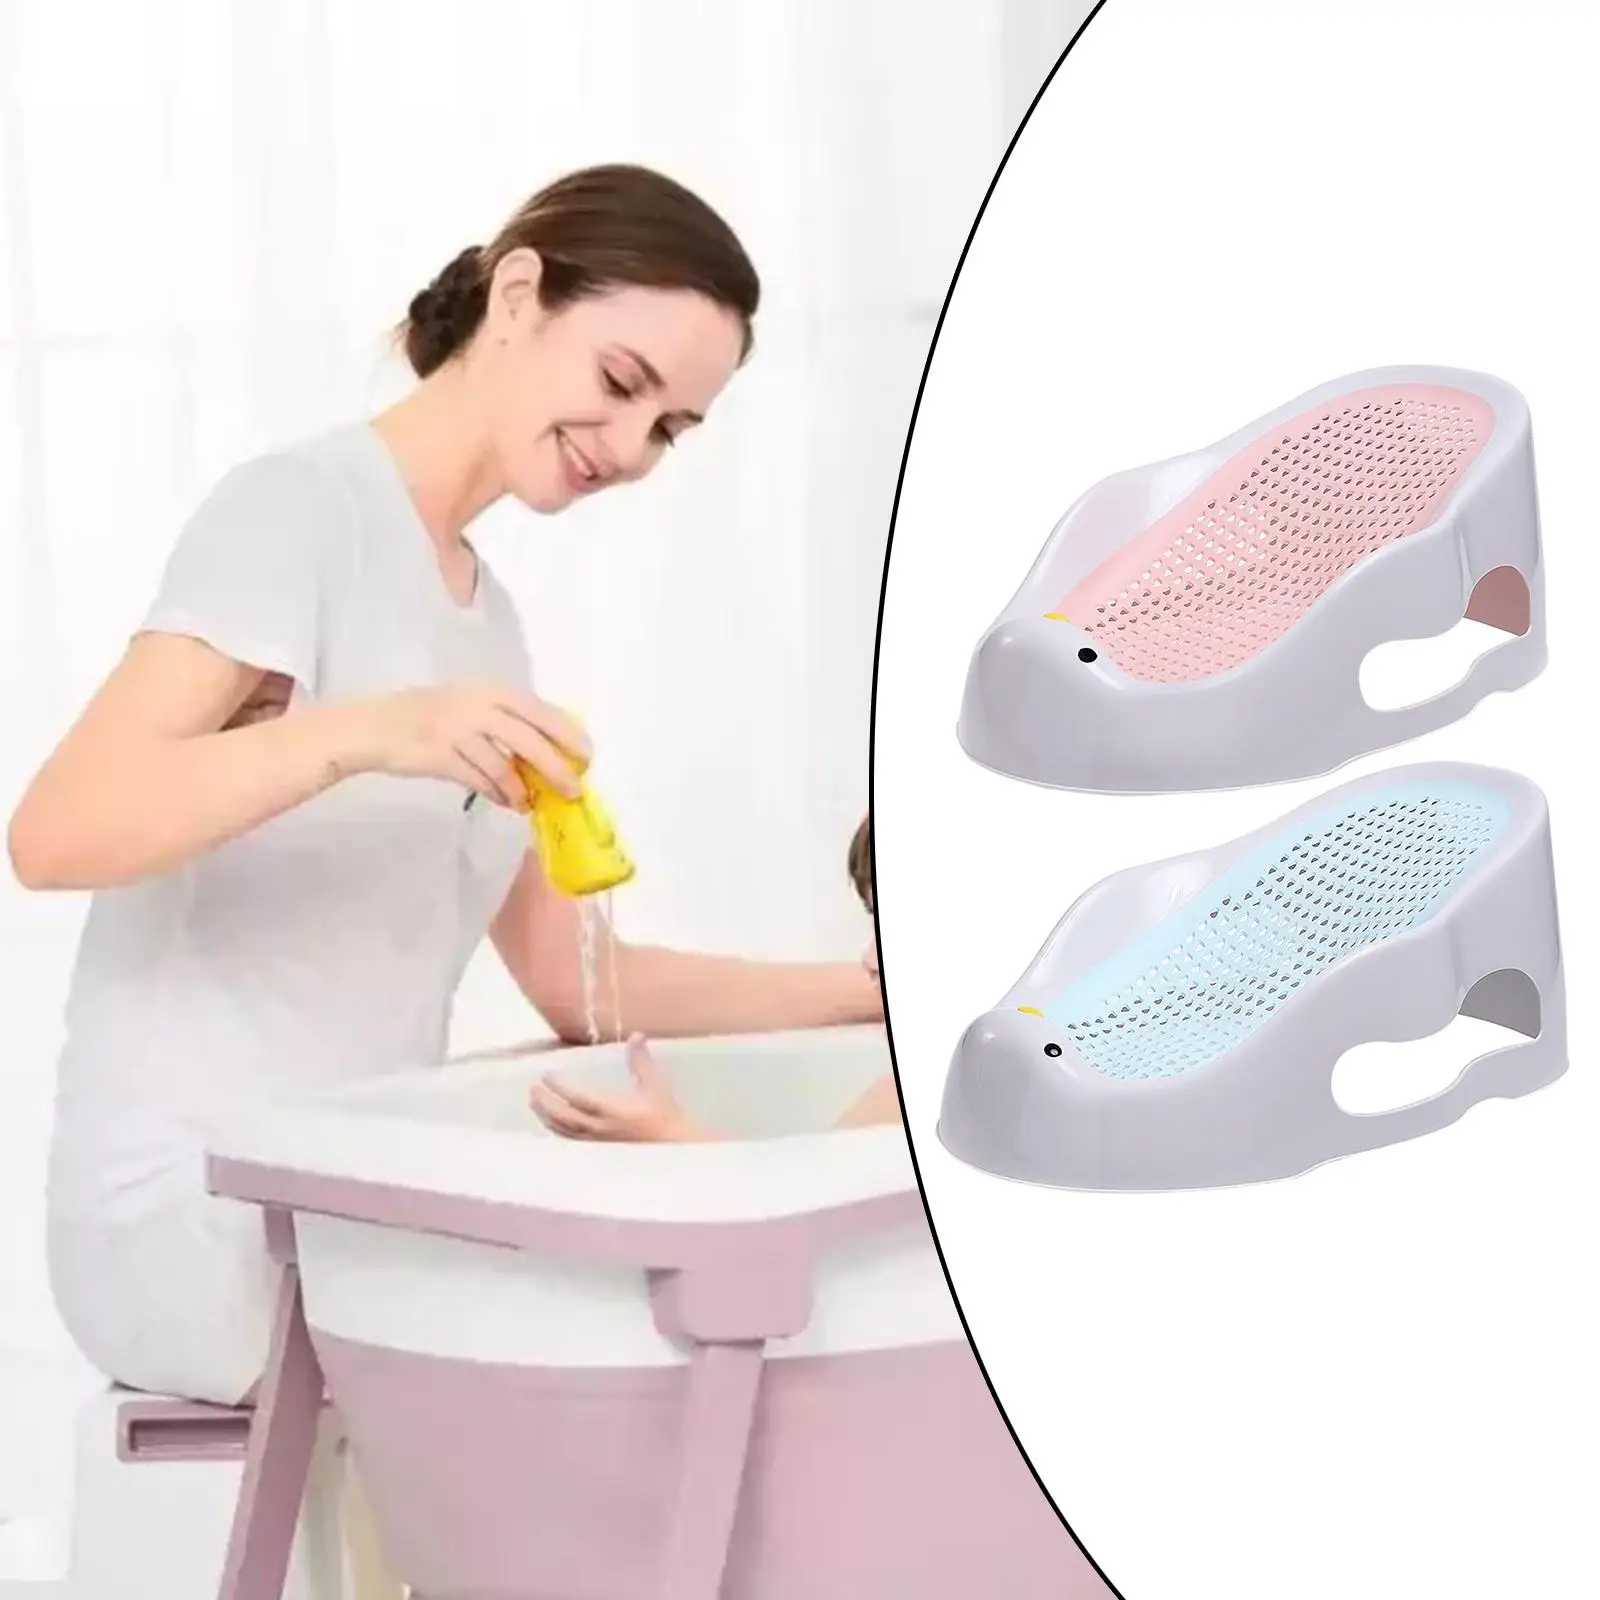 Baby Bath Support Non-Slip Quick-Dry Soft Use from Birth until Sitting up Bathtub Mat Bath Rack for Infant 0-6 Months Newborn